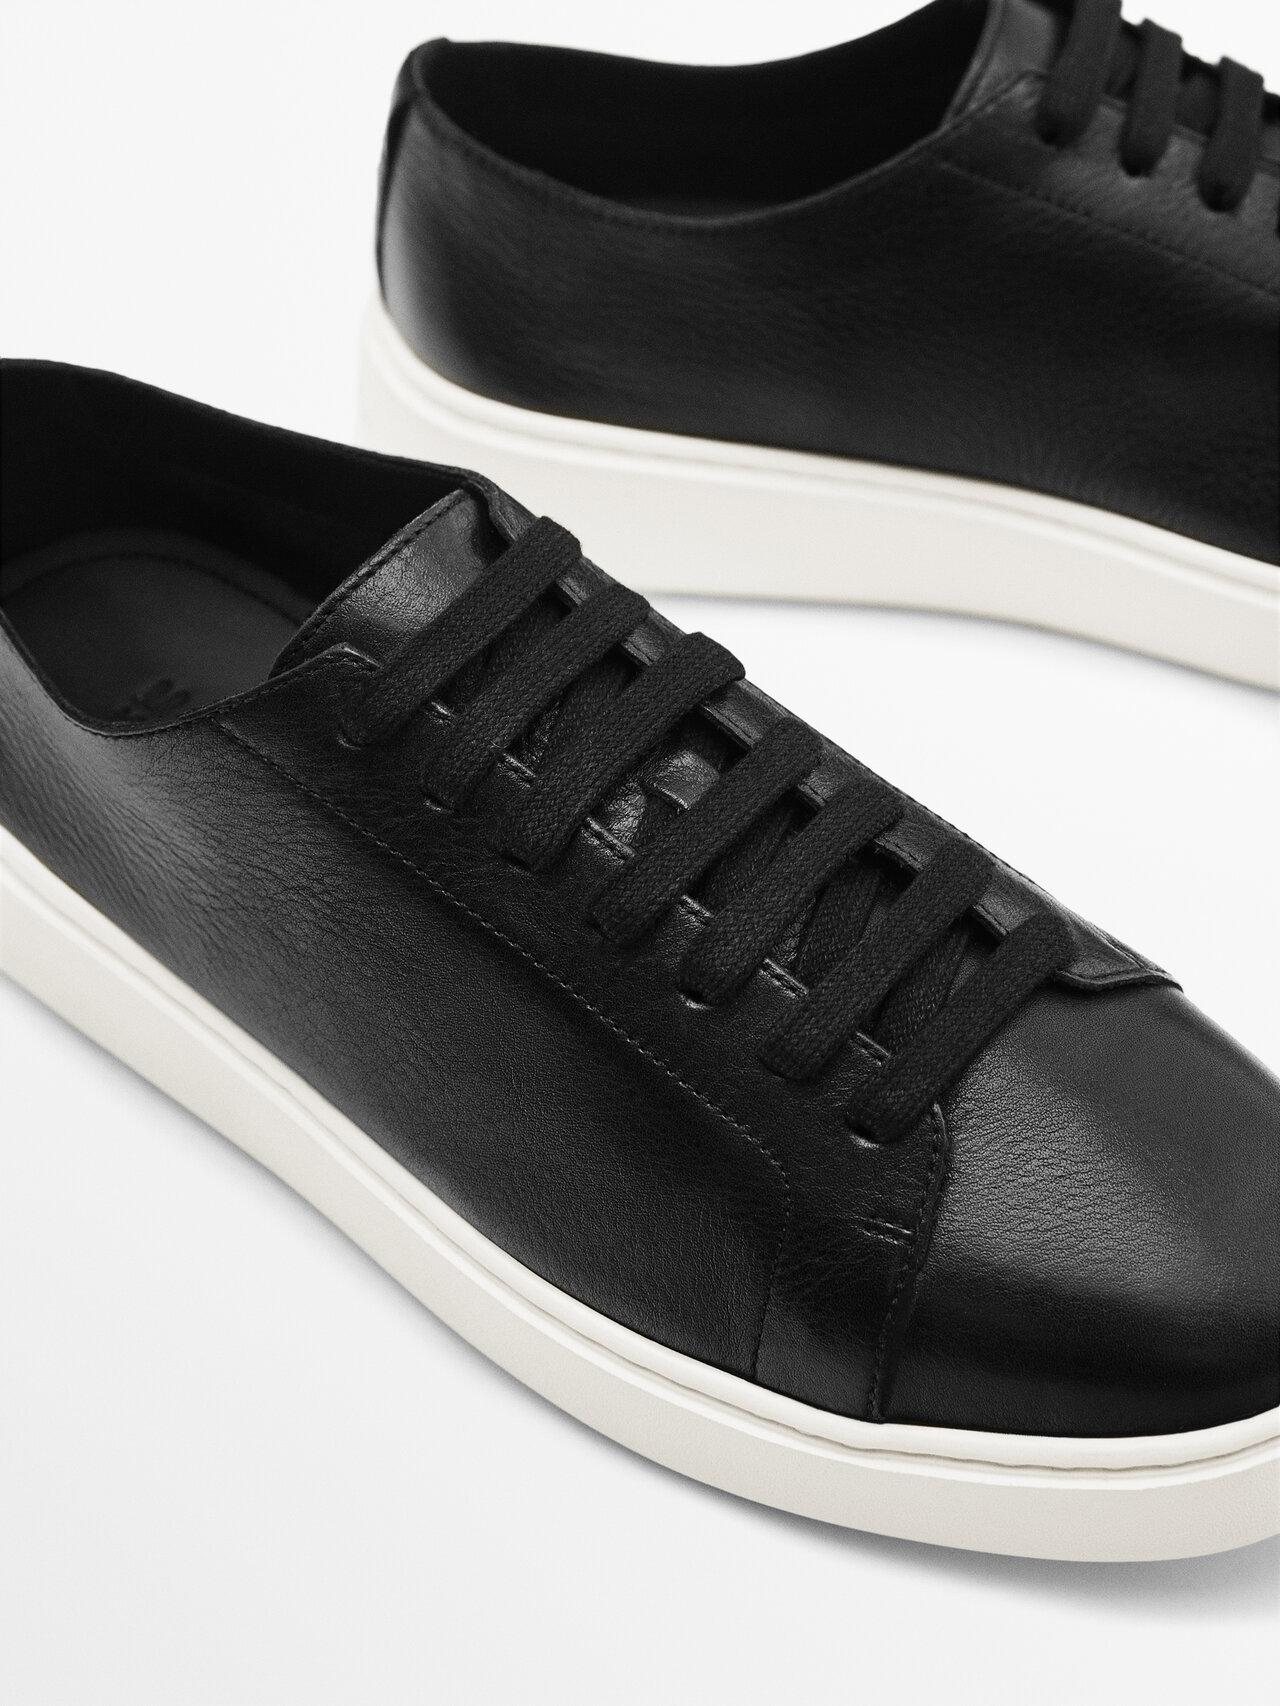 MASSIMO DUTTI Soft Nappa Leather Trainers in Black for Men | Lyst